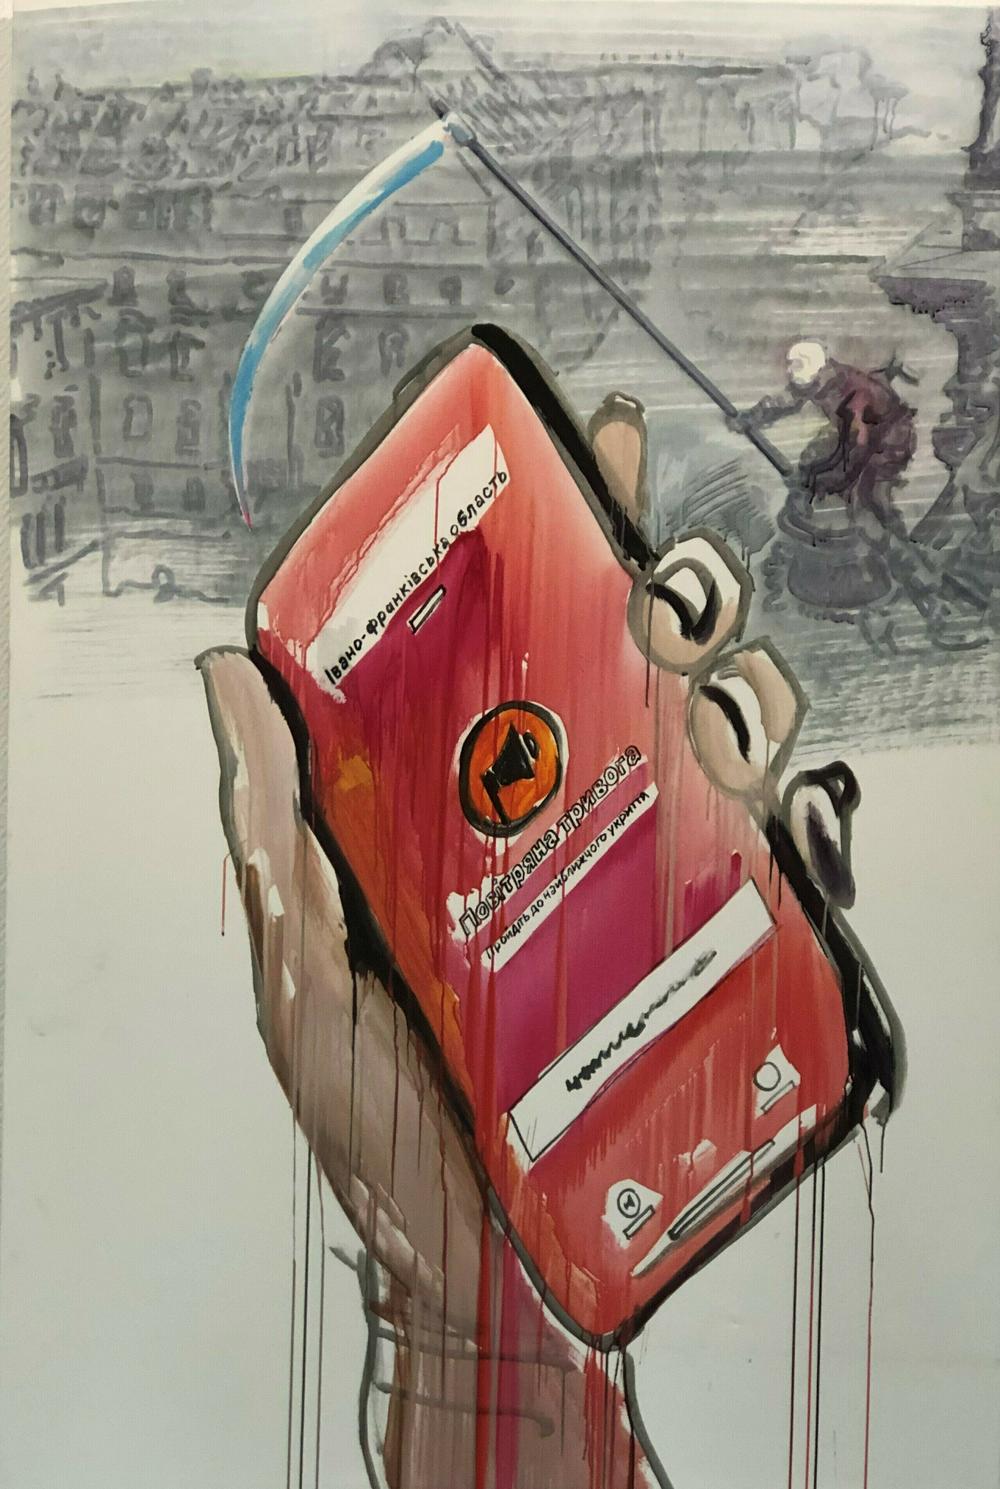 A painting at the 'How Are You?' art exhibit in Kyiv. The cell phone depicts an air raid alert that Ukrainians receive when a Russian air strike is underway. The background shows a famous World War II photo of Soviet troops capturing Berlin.